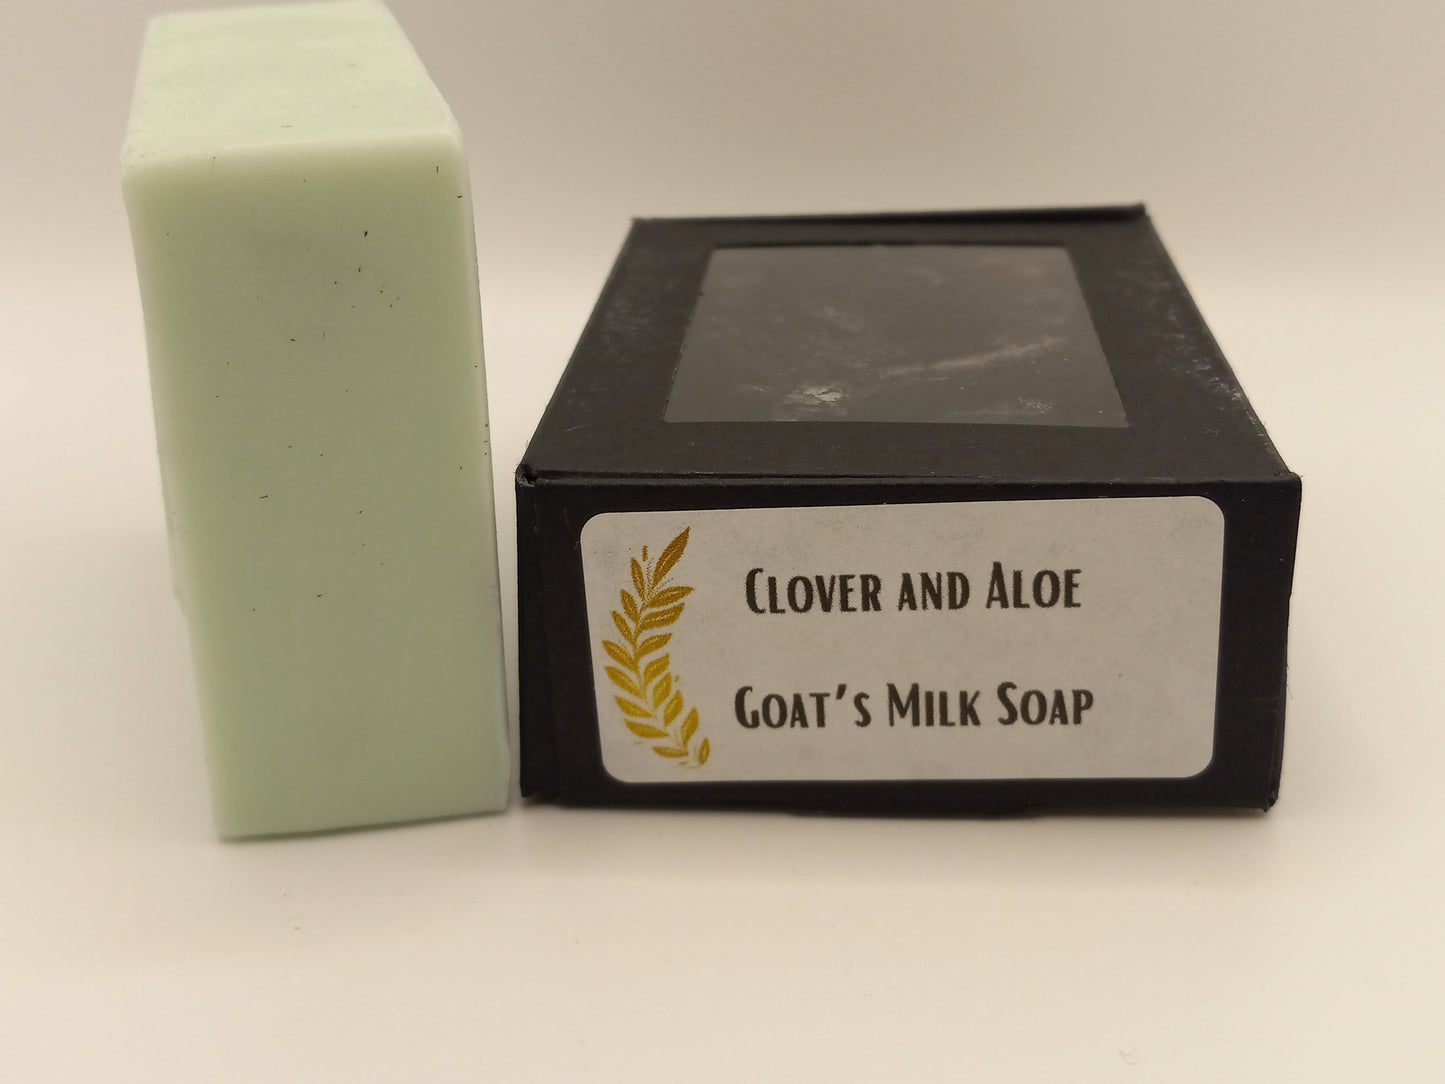 Clover and Aloe - Hand Poured Goat's Milk Soap